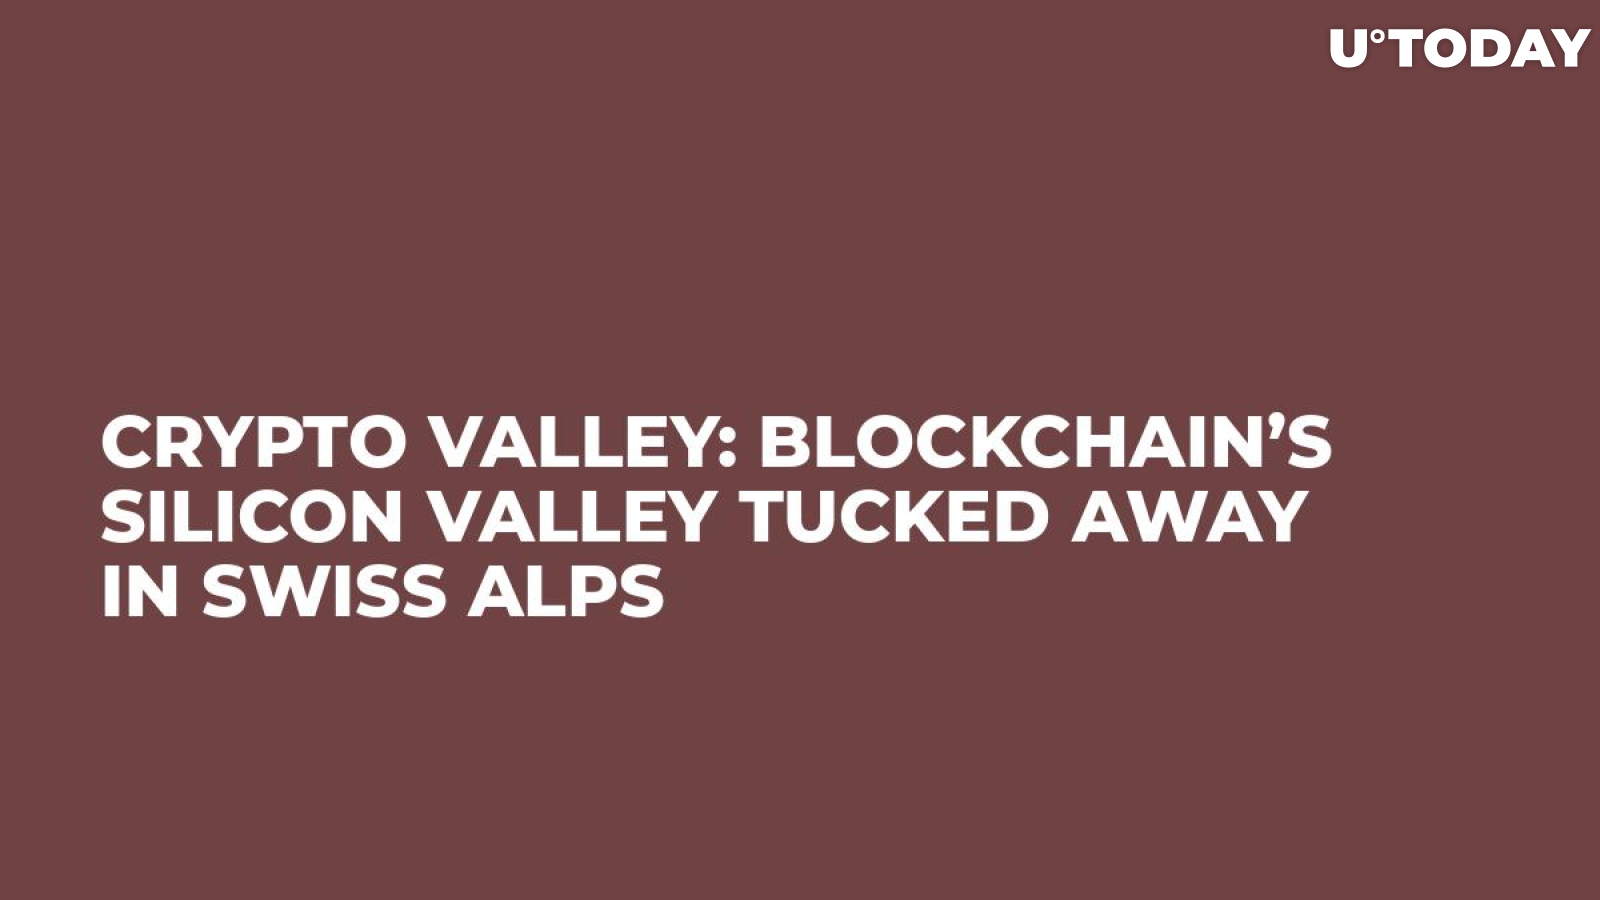 Crypto Valley: Blockchain’s Silicon Valley Tucked Away in Swiss Alps